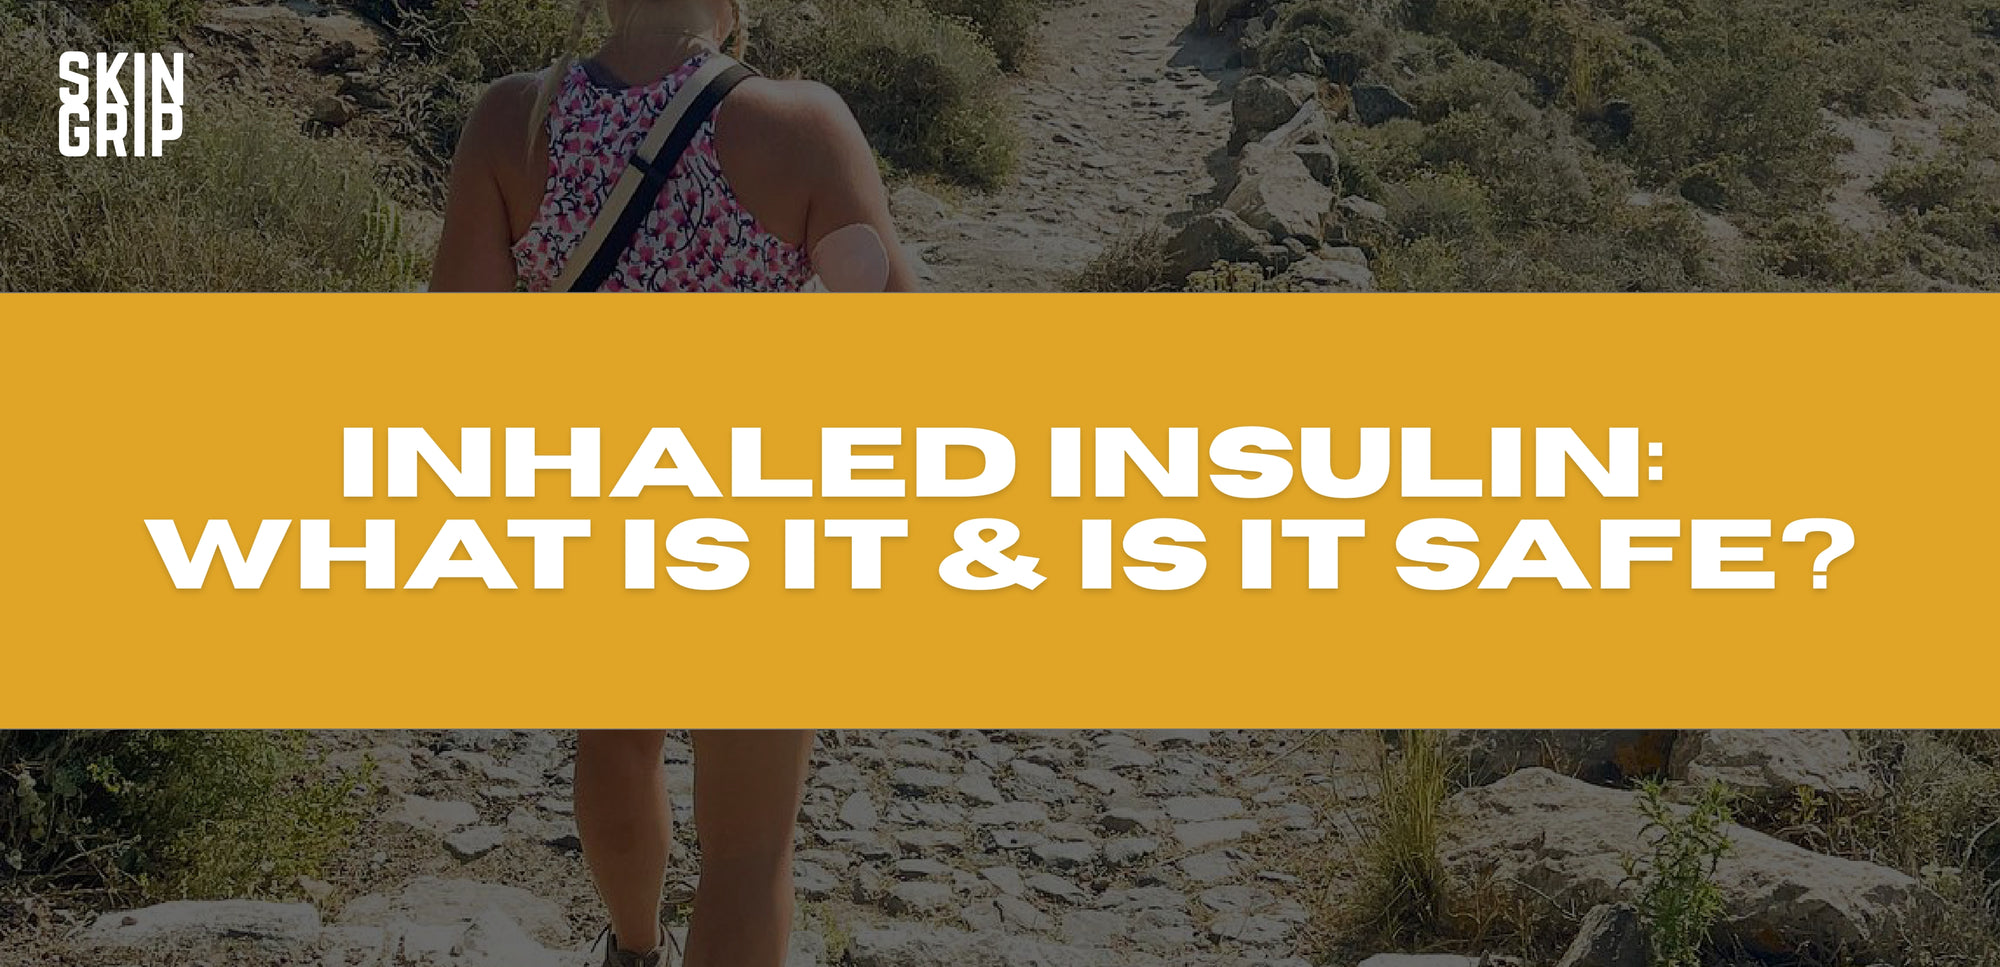 Inhaled Insulin: What is it & is it safe?